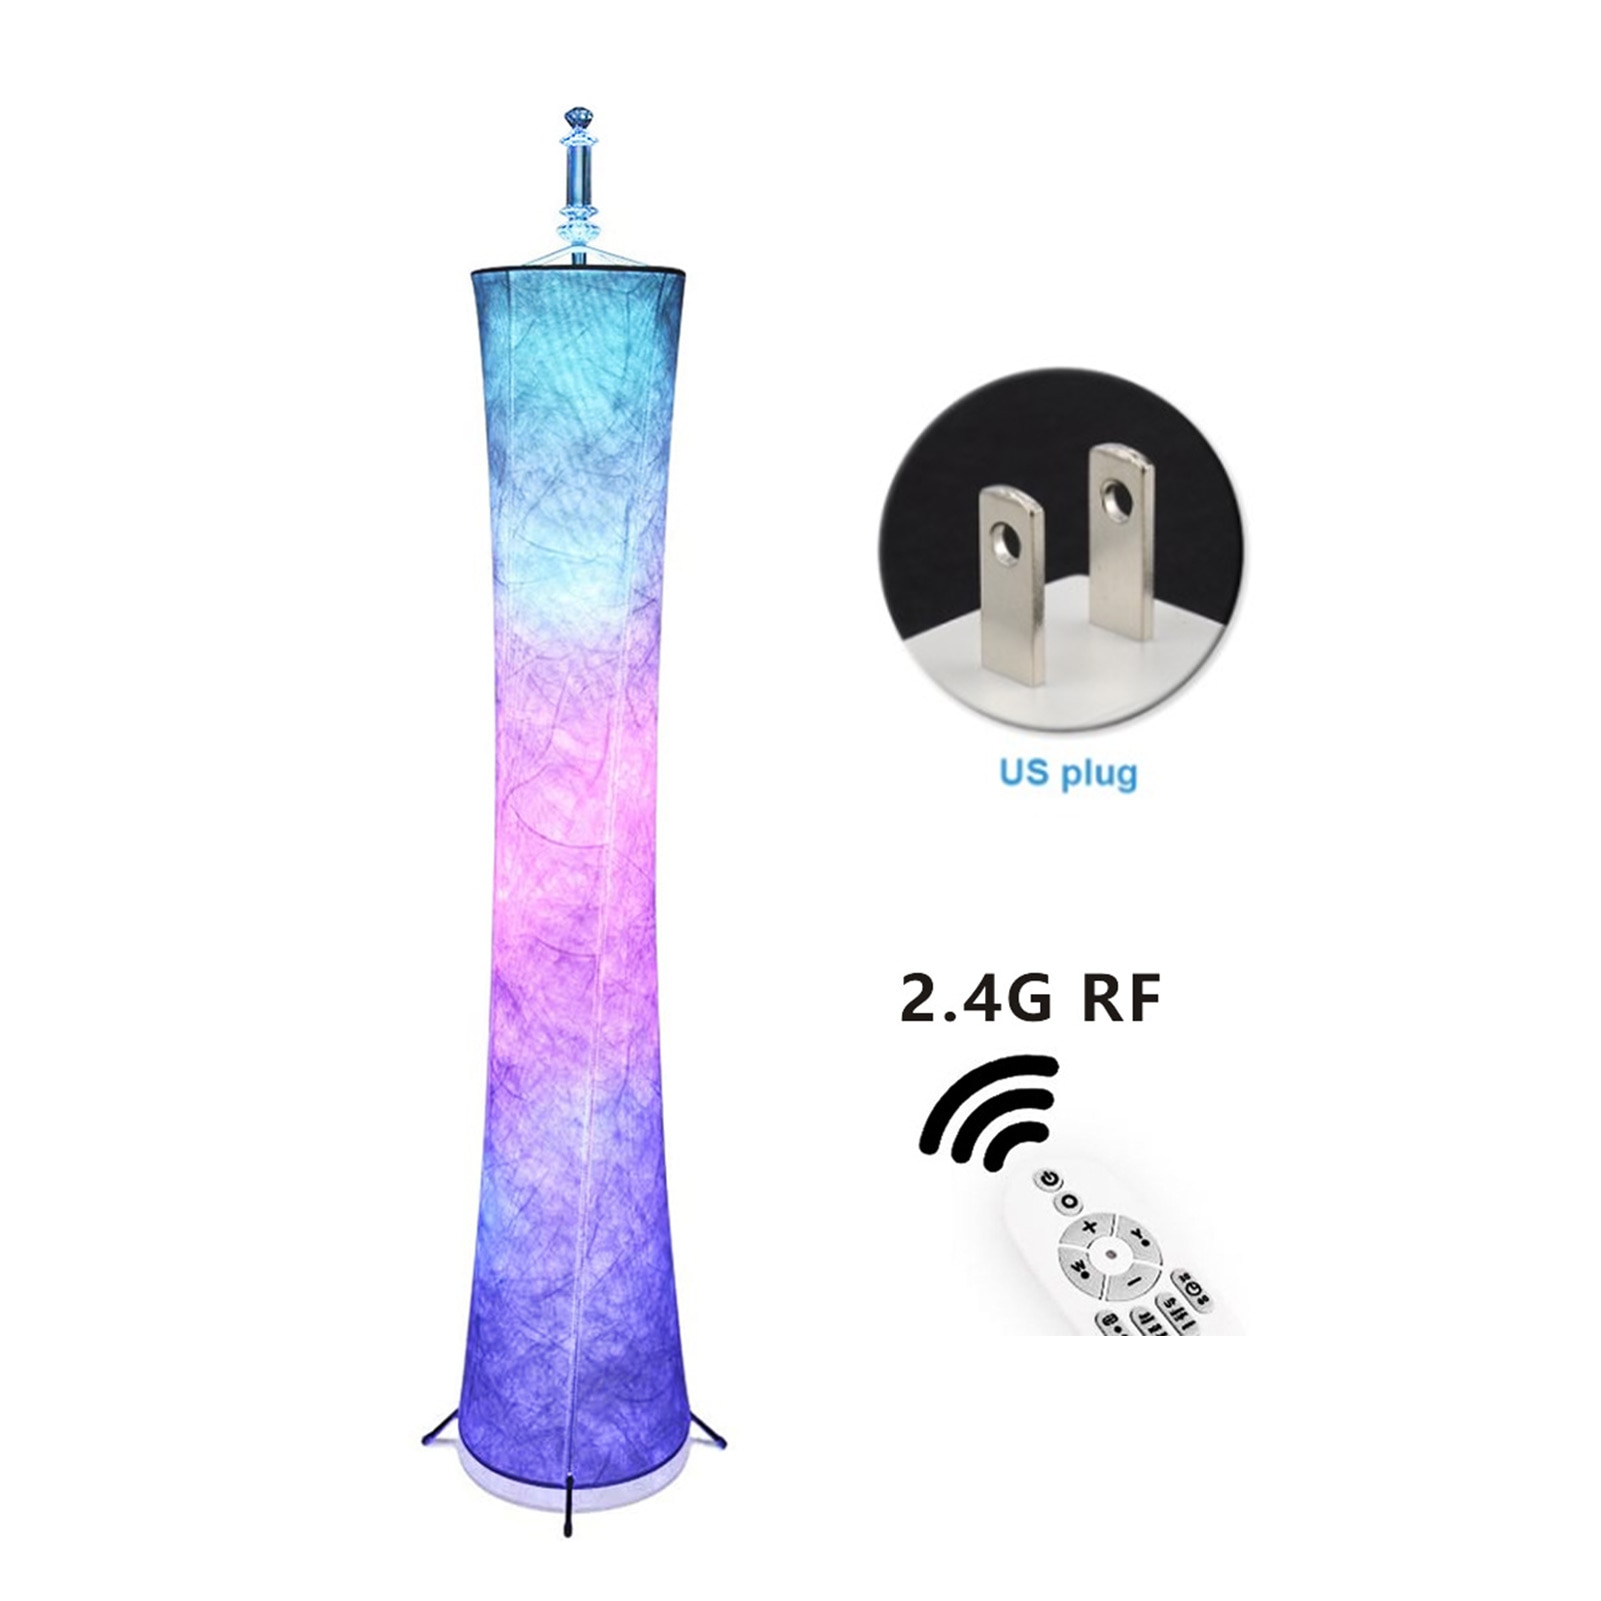 RGB Color Changing Atmosphere Modern LED Floor Lamp Home Decor With Remote Control Hotel Slim Waist Fabric Shade Living Room